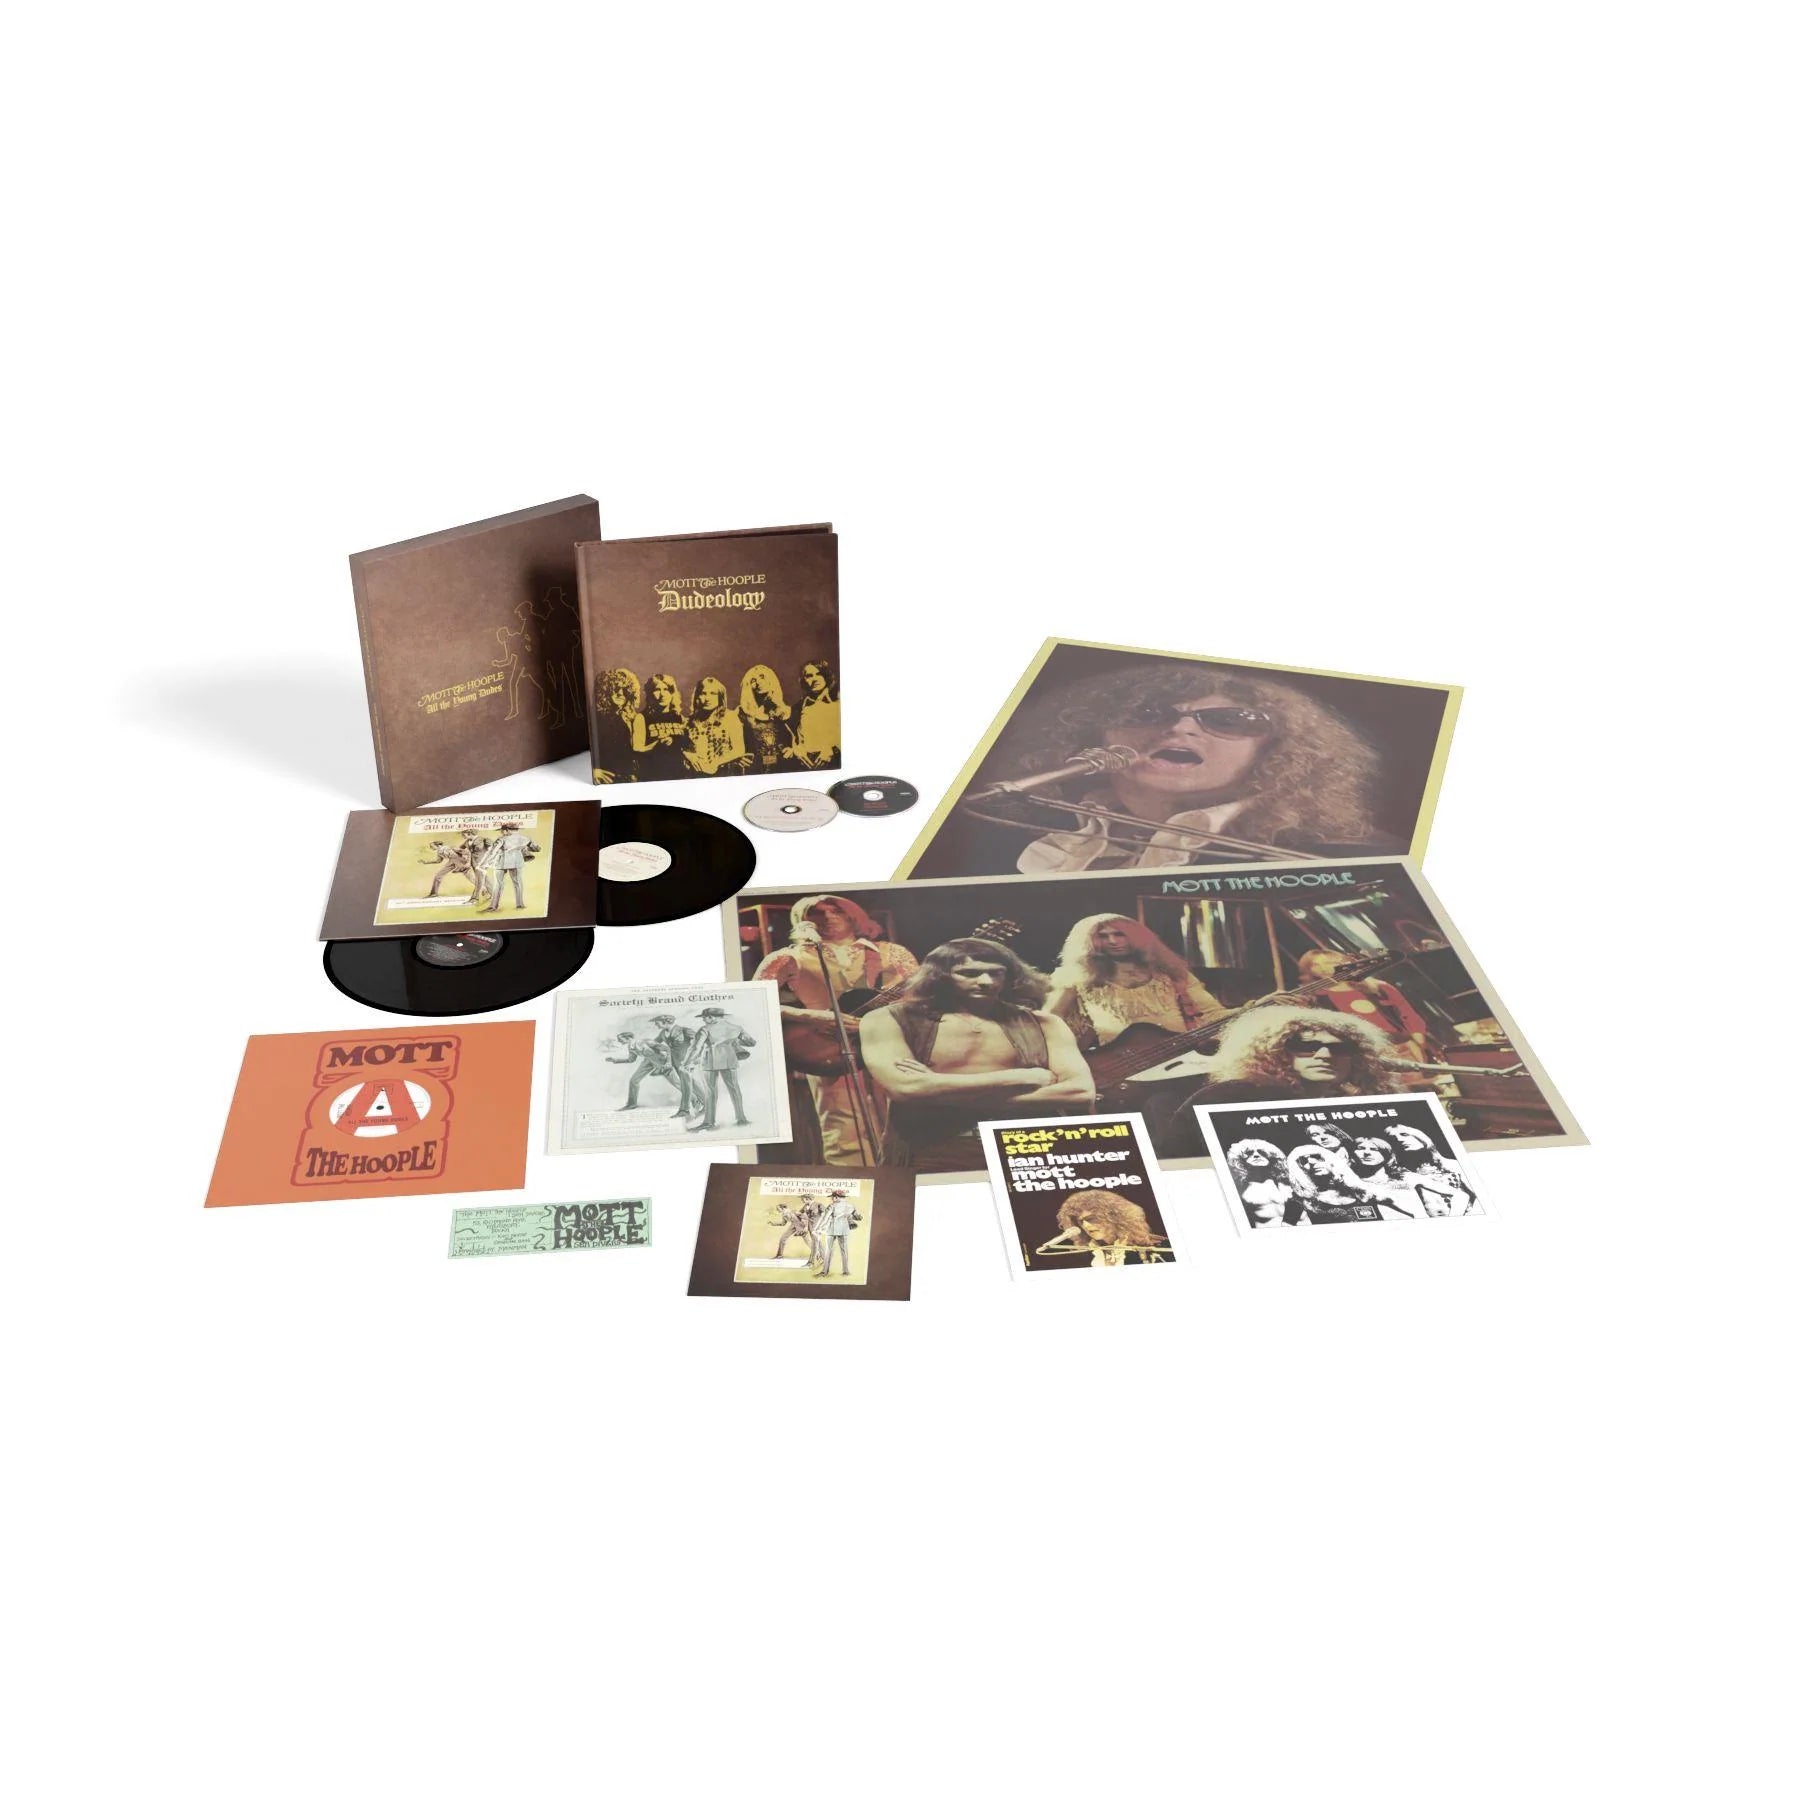 Mott the Hoople - All The Young Dudes: 50th Anniversary Edition [2LP/2CD]